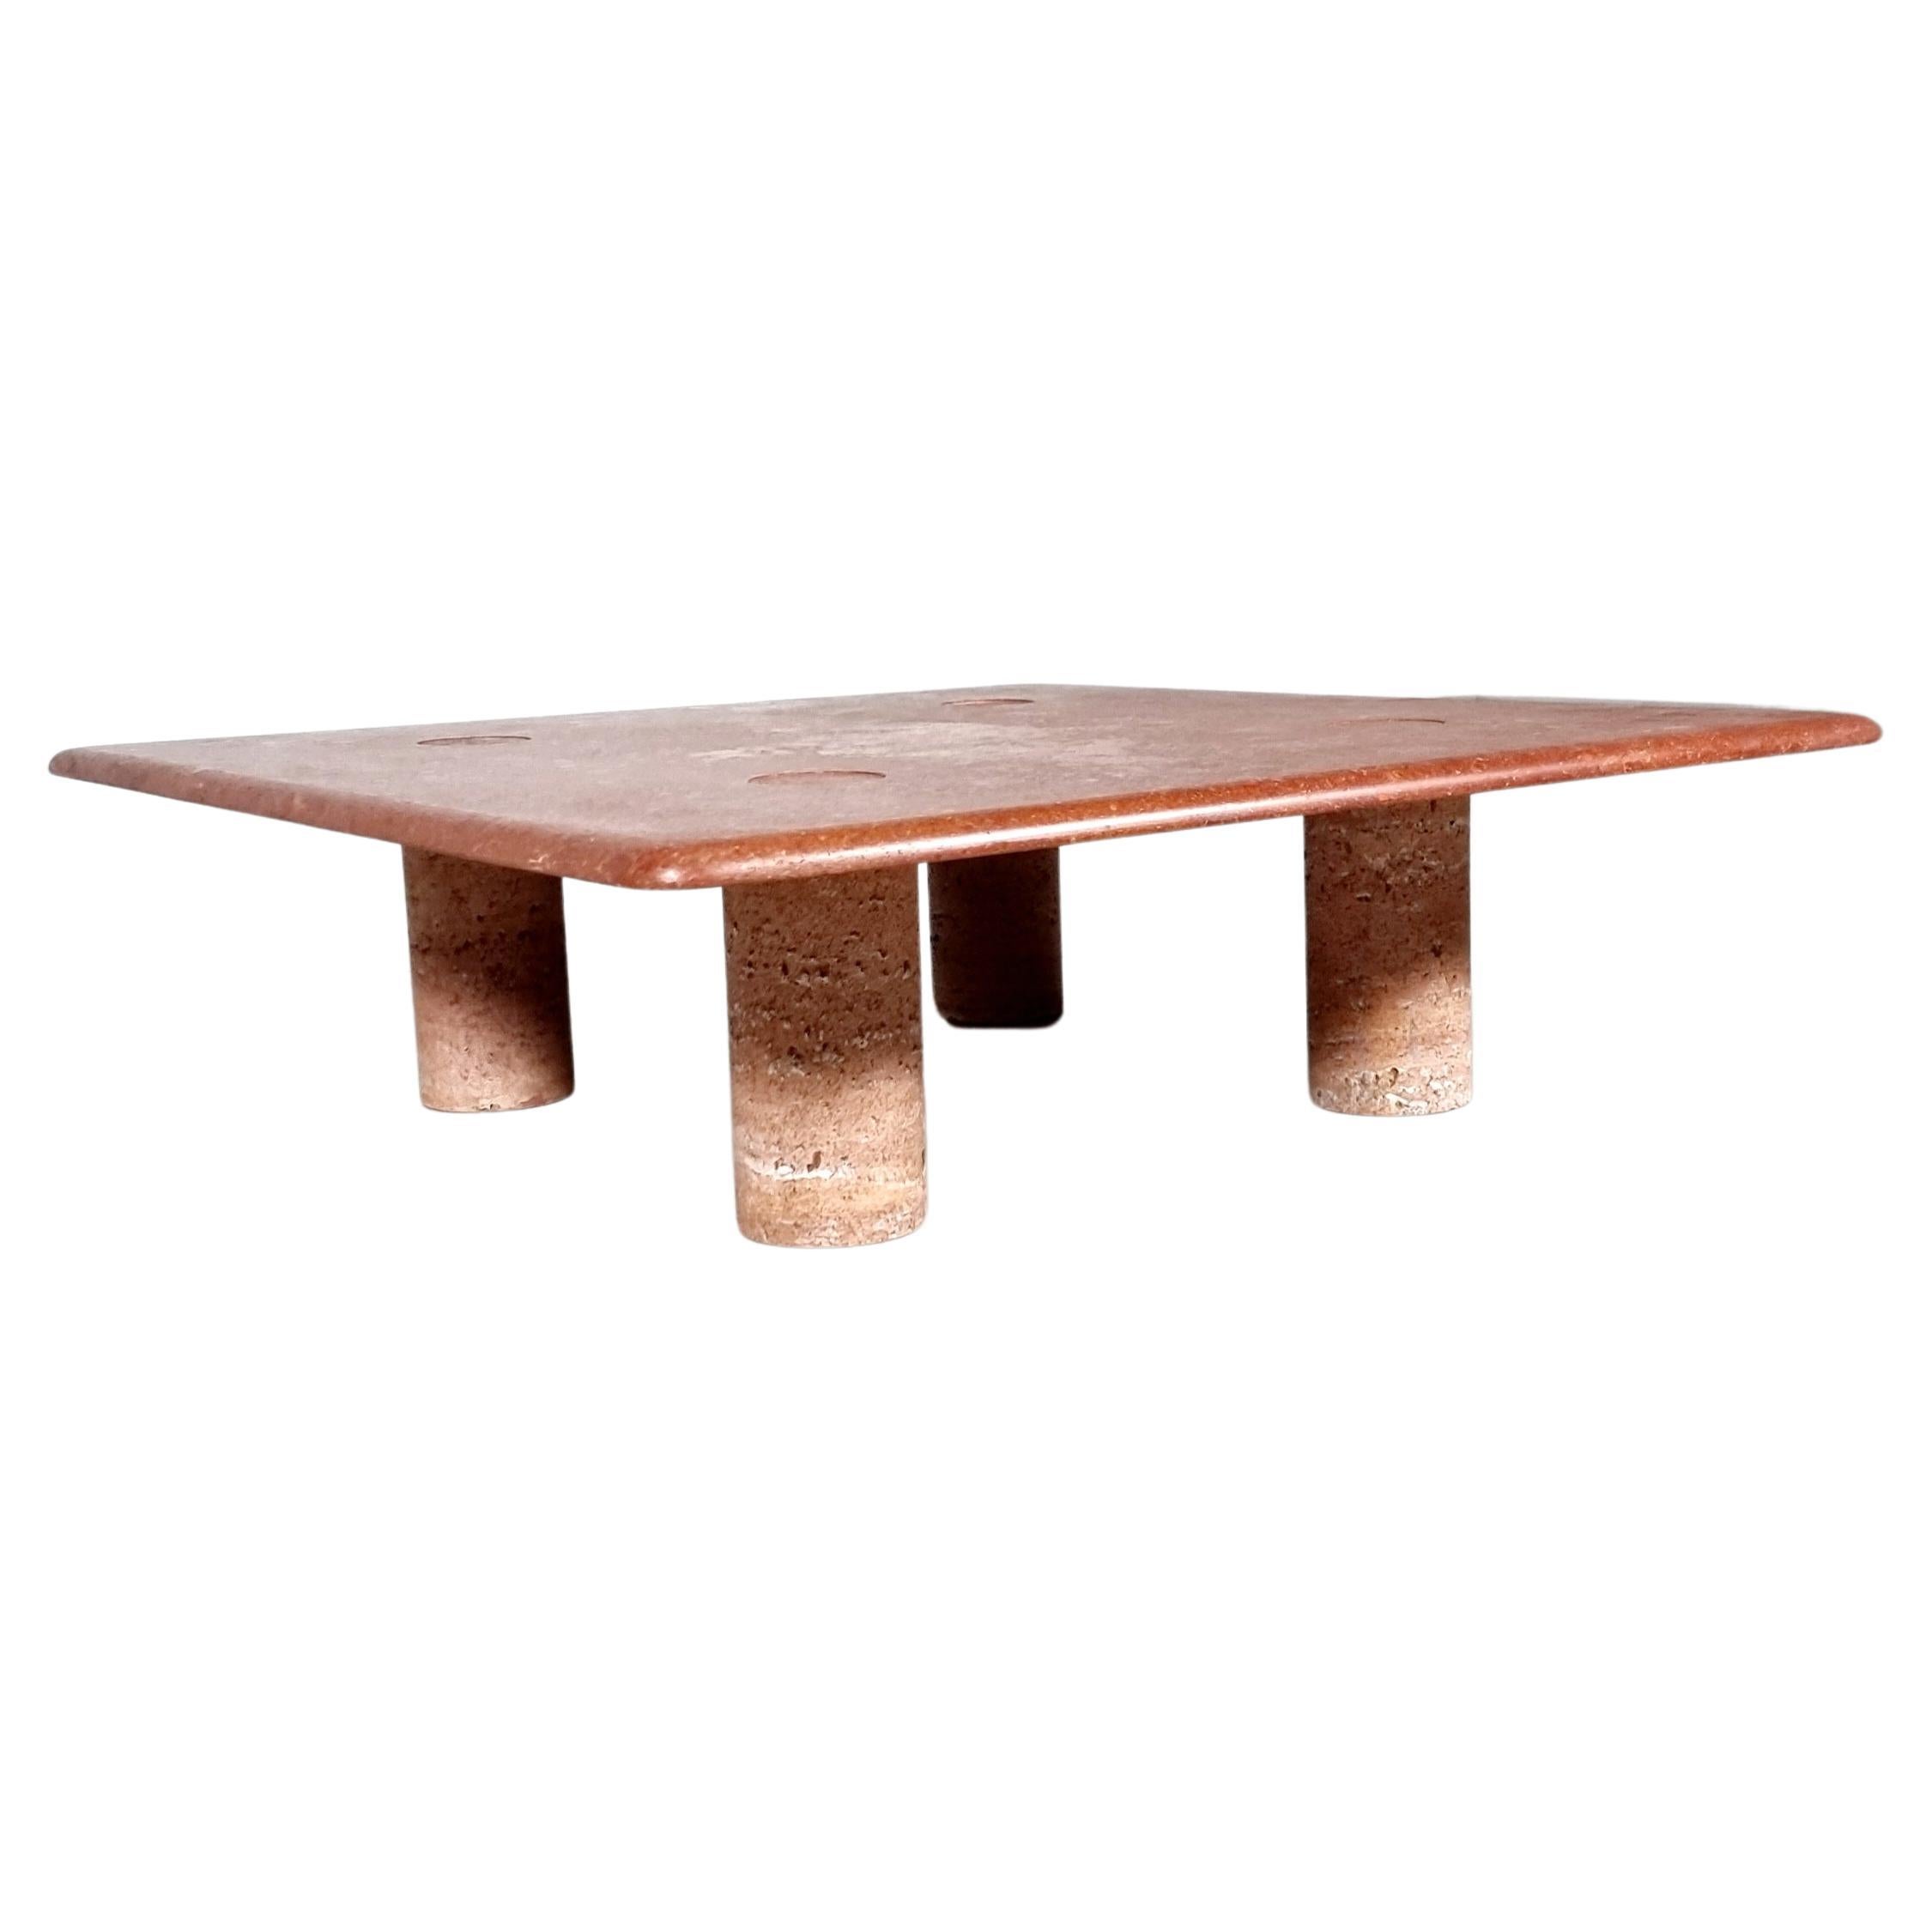 A Timeless red travertine coffee table with interlocking legs that was designed by Angelo Mangiarotti for Up&Up in the 1970s.

The table features no joints or clamps and is architectural in its structure. The table rests on four cone-shaped legs.